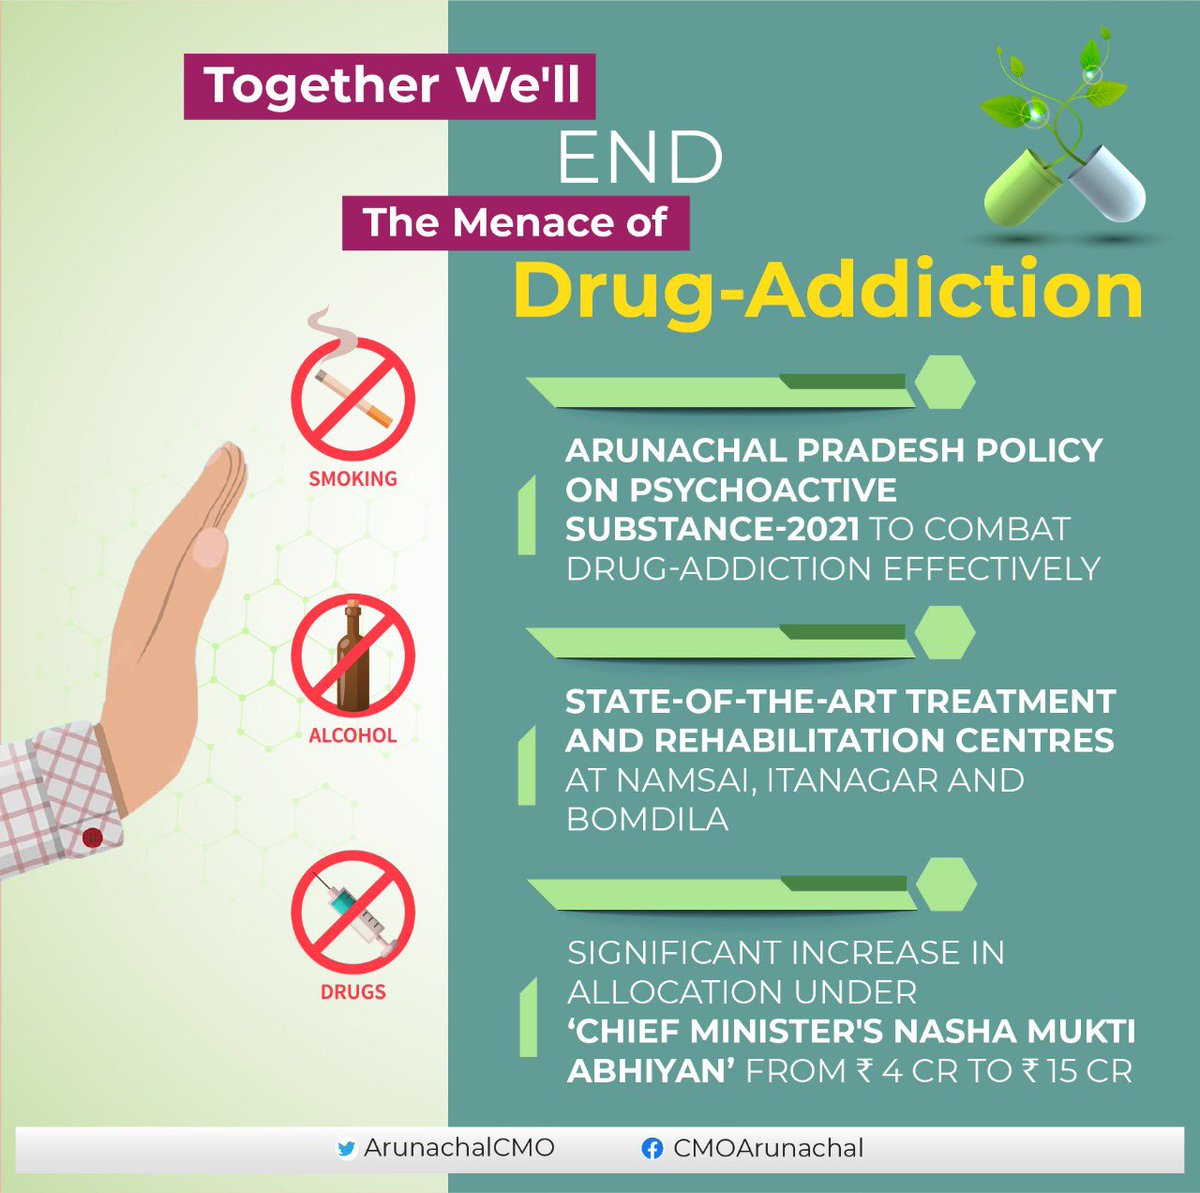 A wholesome approach has been adopted to deal with the menace of drug-addiction decisively in #ArunachalPradesh. Our youths are the future of the state and the nation. We won't let them fall prey to psychoactive substances. Be a stakeholder in our war against the drug abuse!